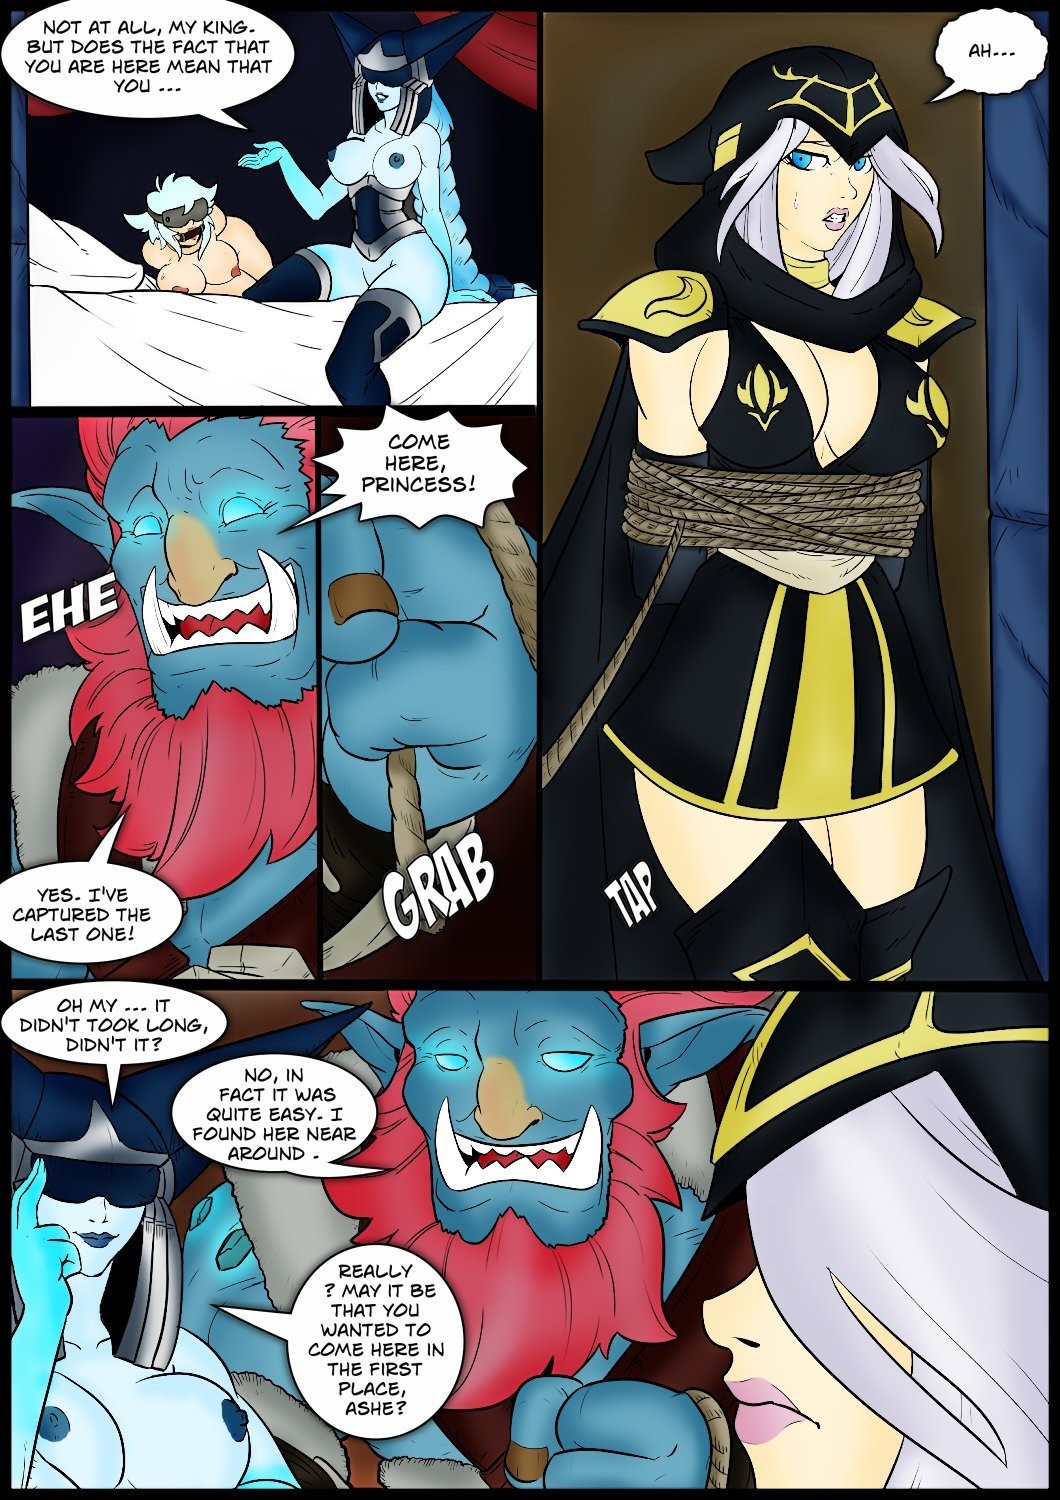 Tales of the Troll King ch. 1 - 3 ] [Colorized] porn comic picture 41